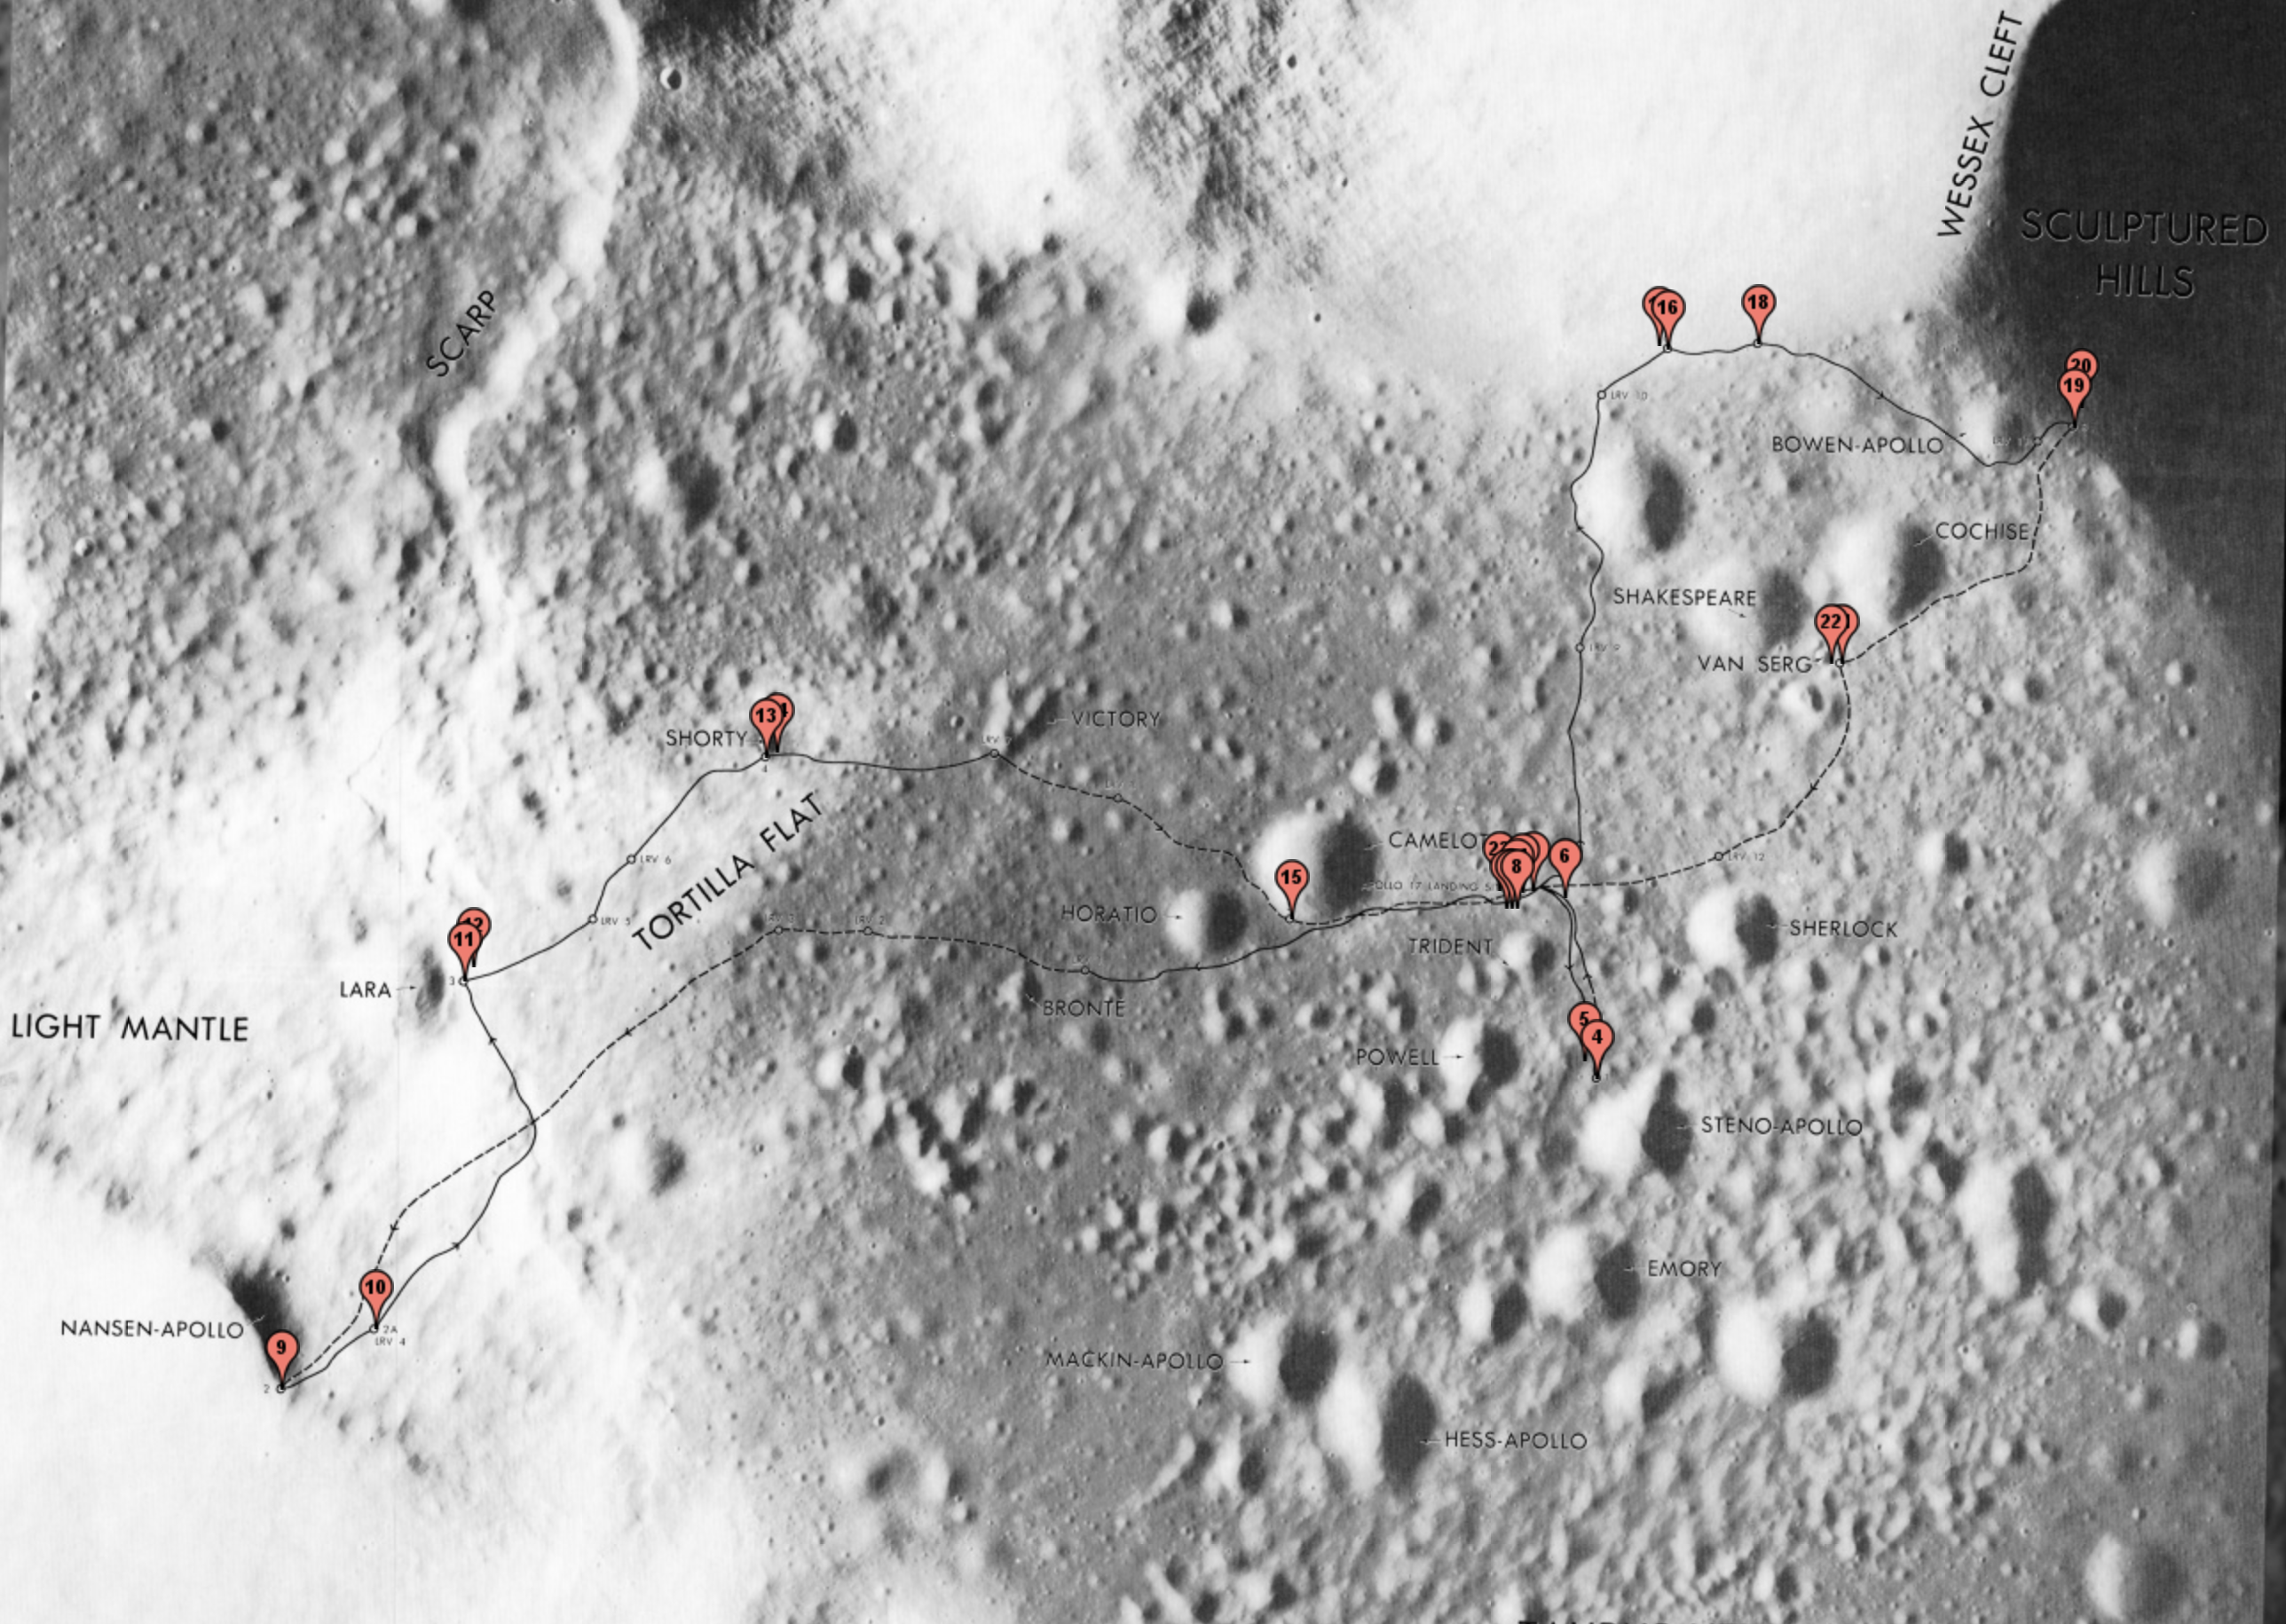 _images/apollo17-map.png